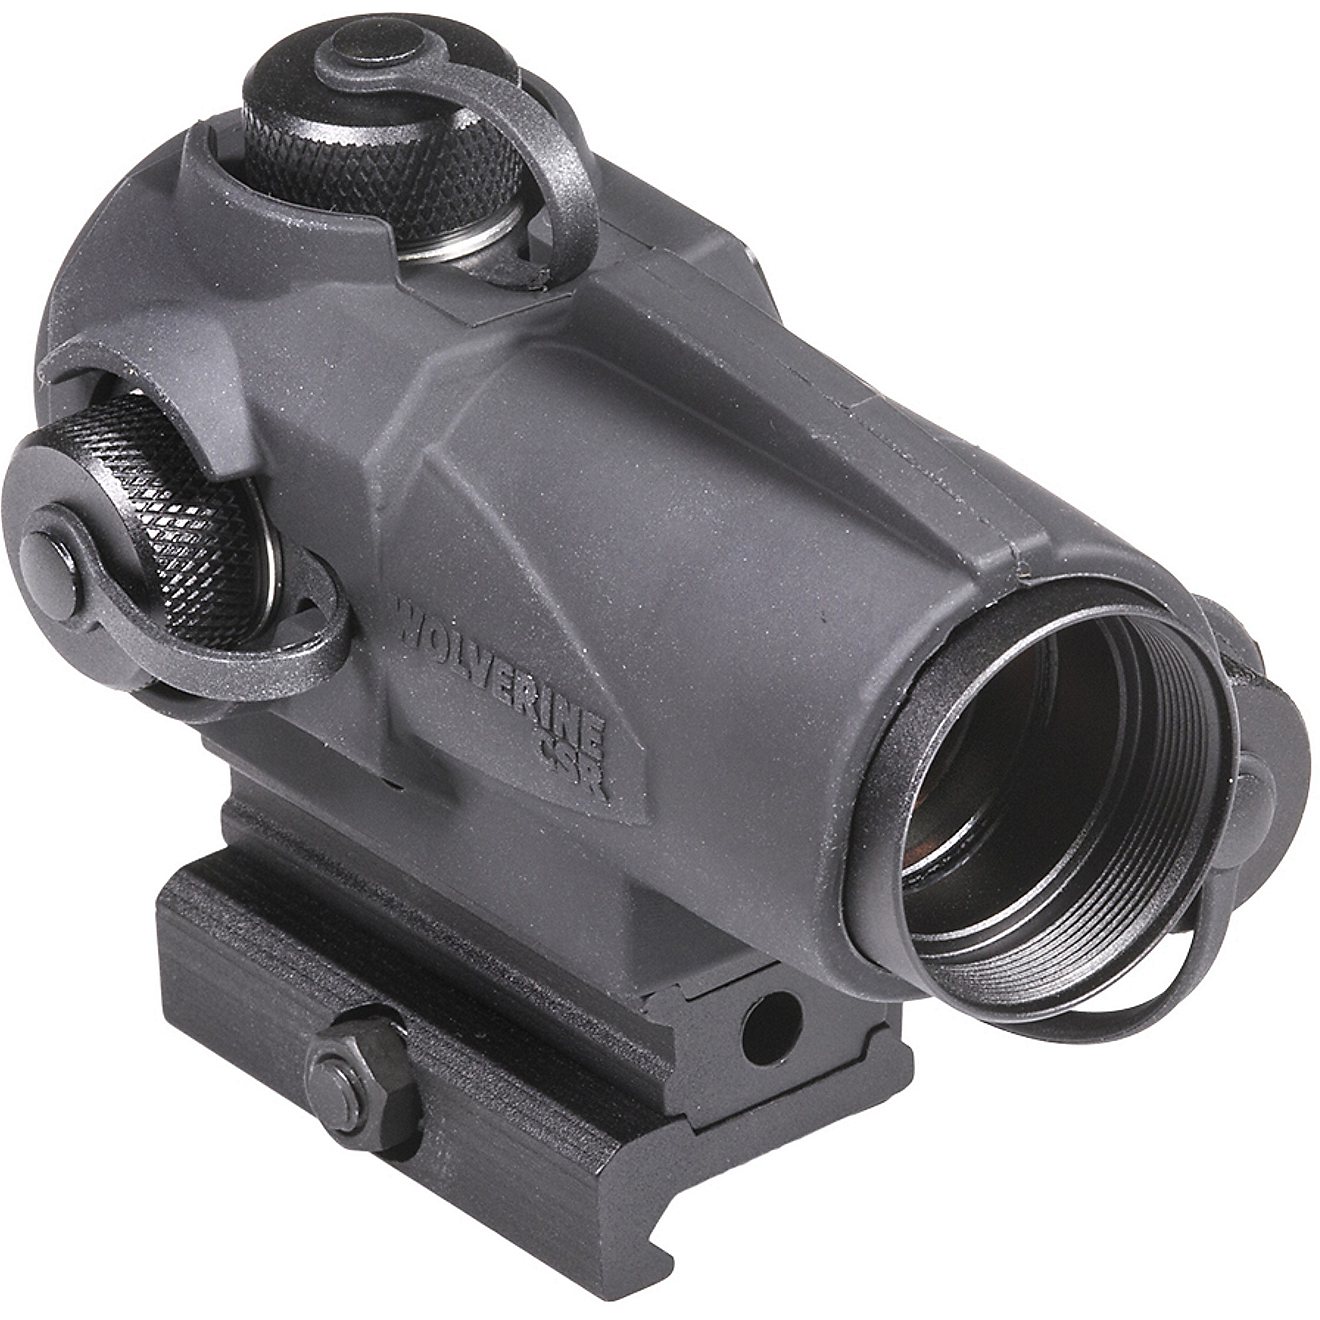 Sightmark Wolverine CSR Red Dot Sight                                                                                            - view number 1